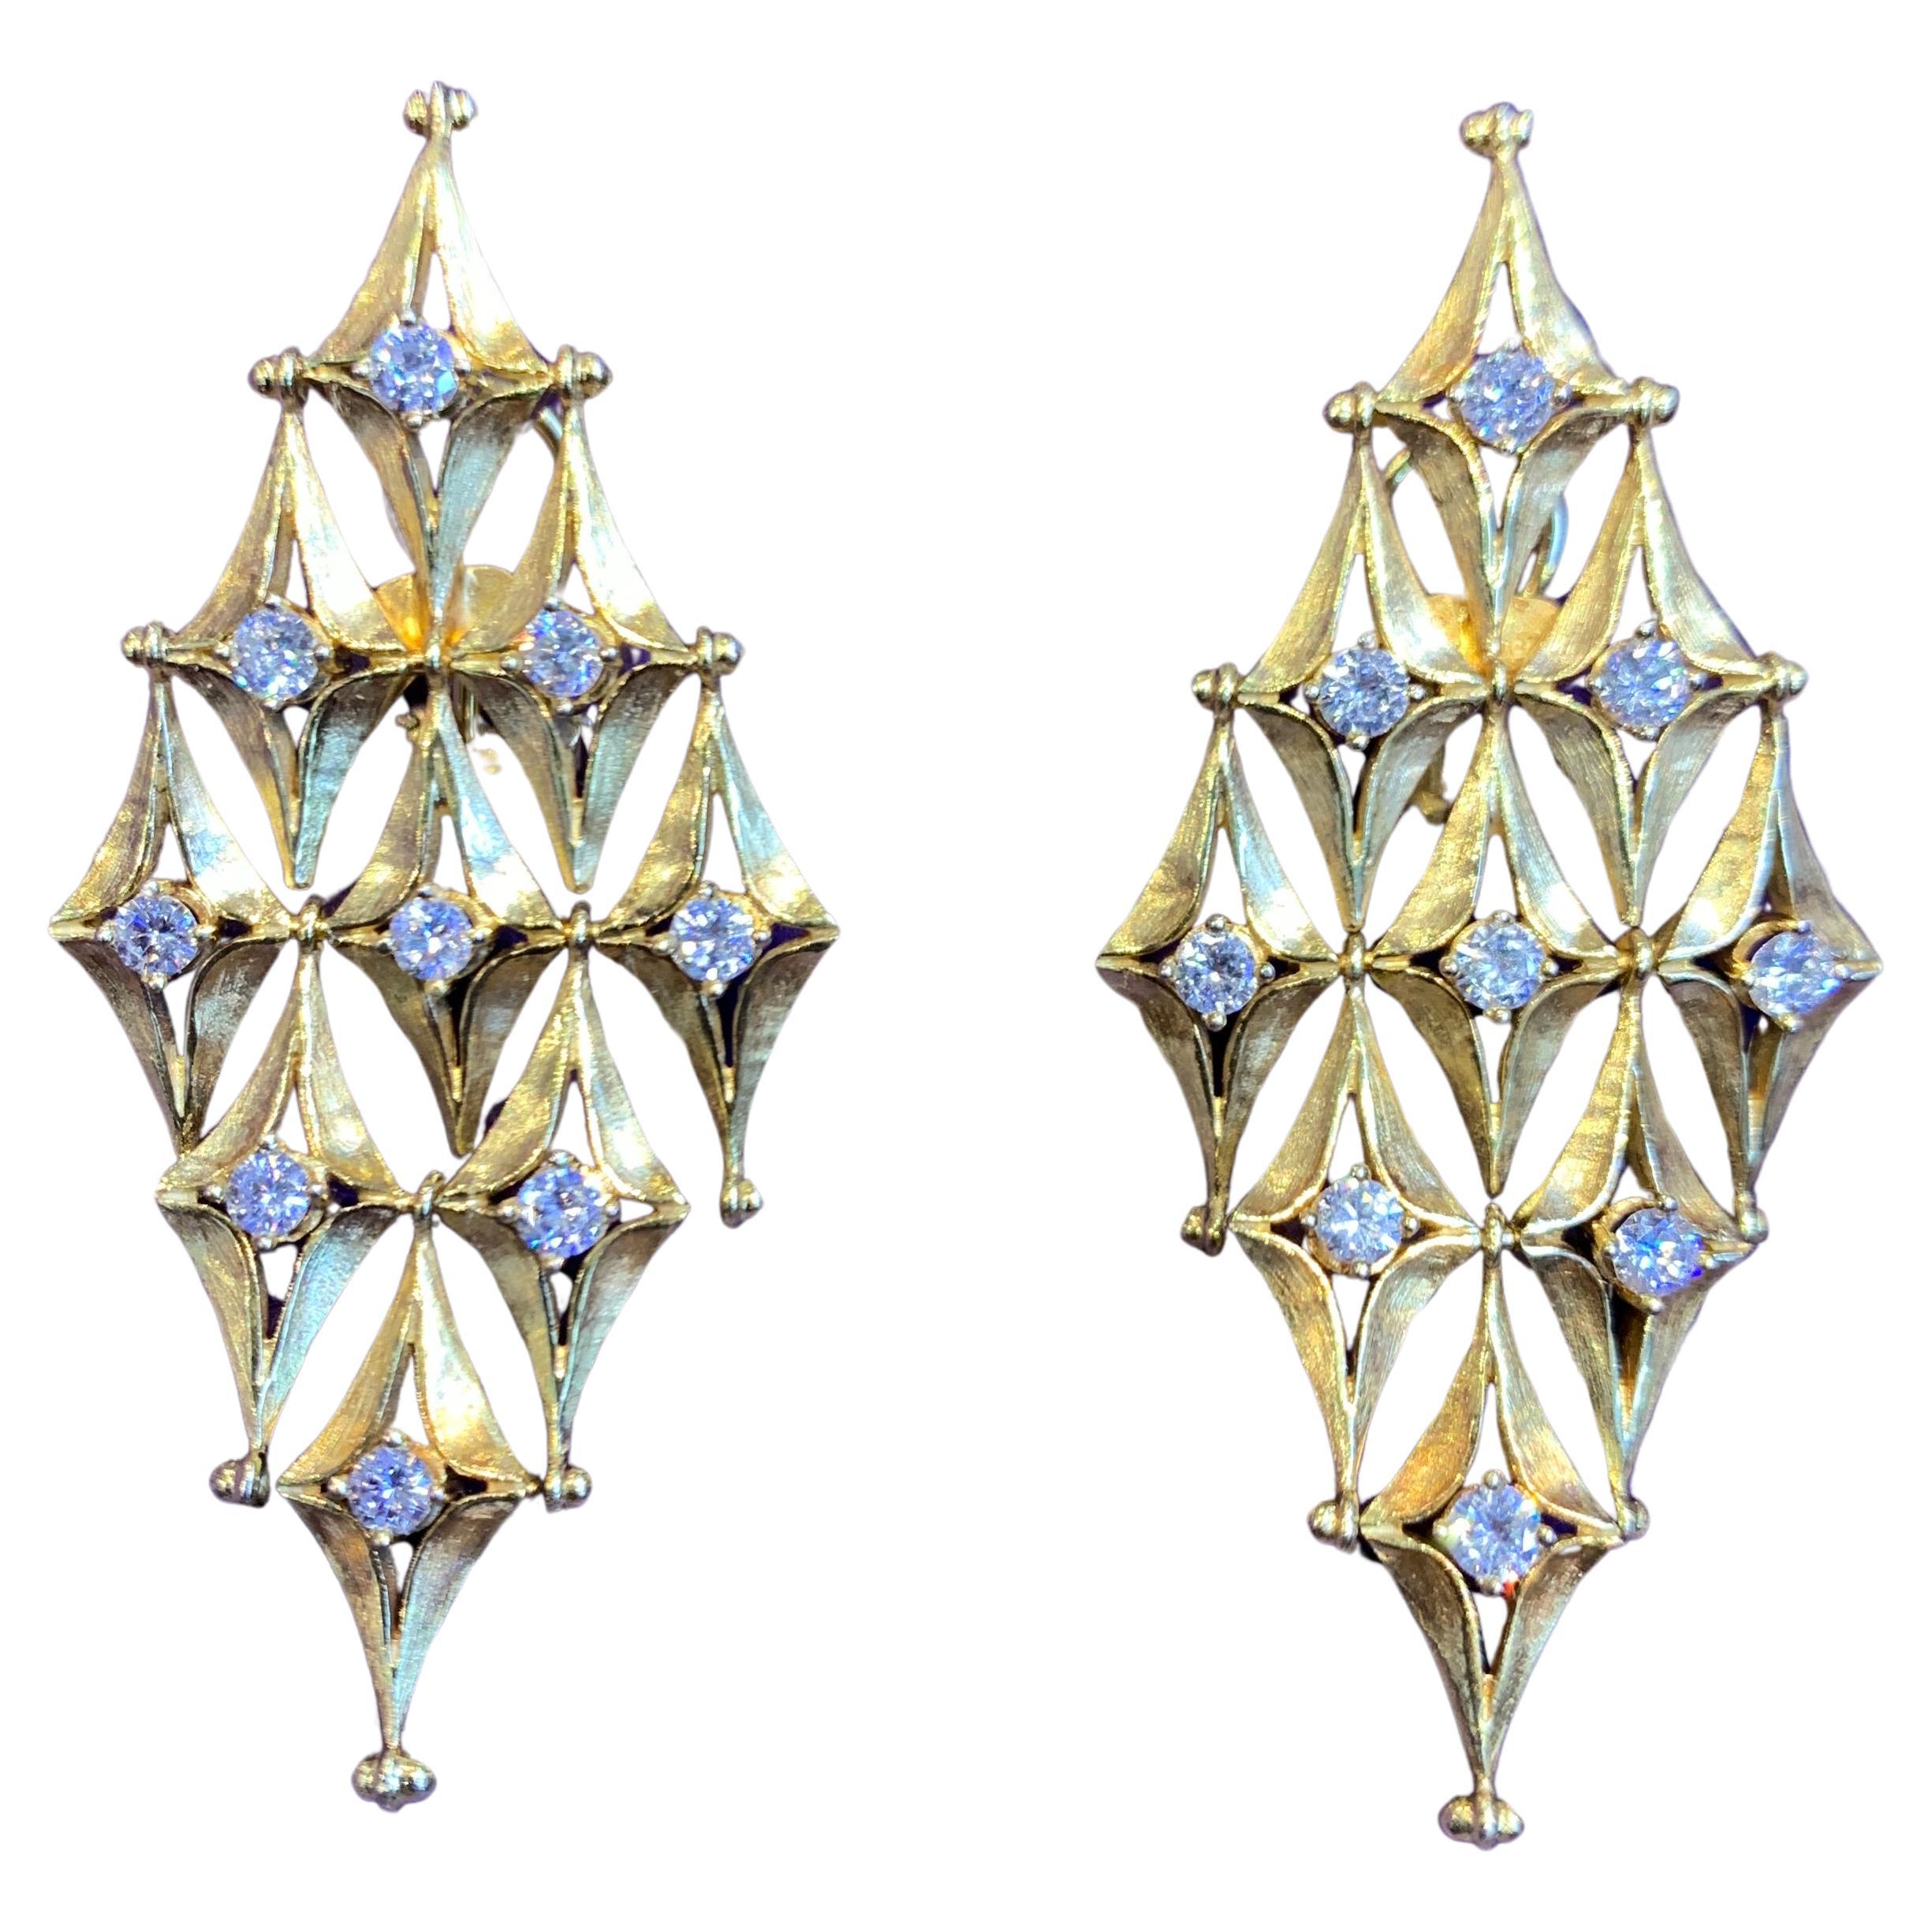 Diamond Shaped Diamond Earrings

A pair of 18 karat yellow gold earrings set with 18 round cut diamonds 

Total Approximate Diamond Weight: 2.08 carats

Measurements: 2.25